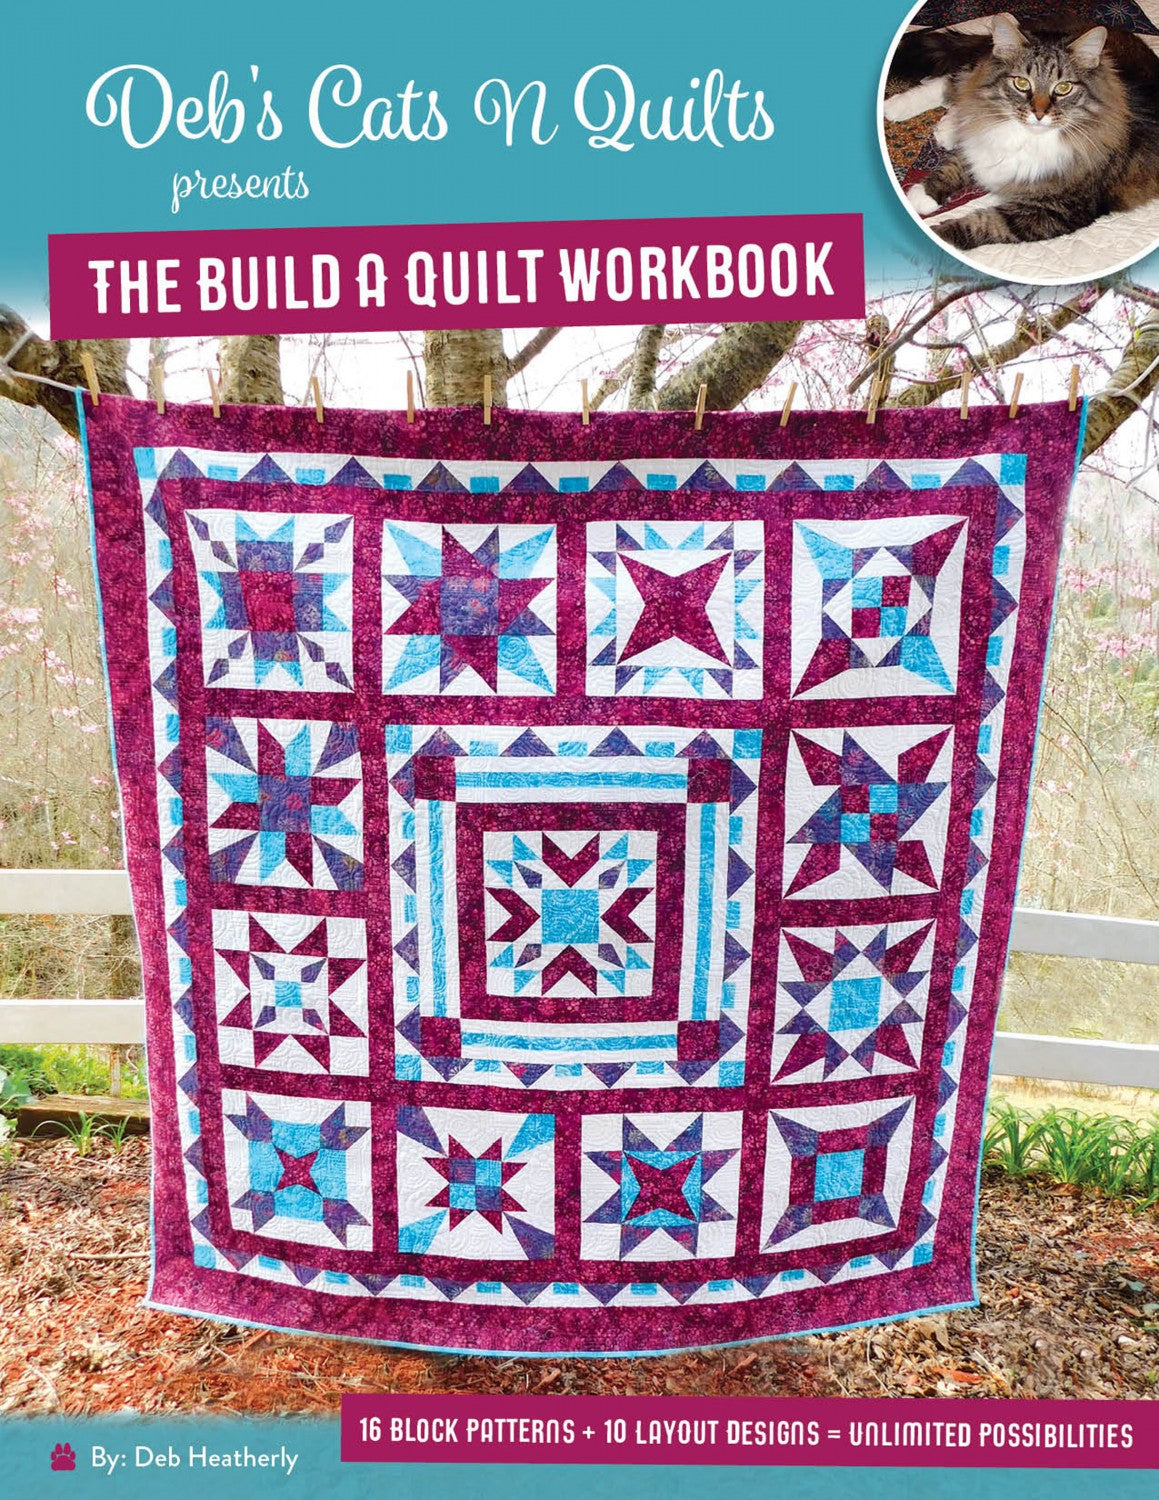 The Build a Quilt Workbook by Deb Heatherly of Deb's Cats N Quilts